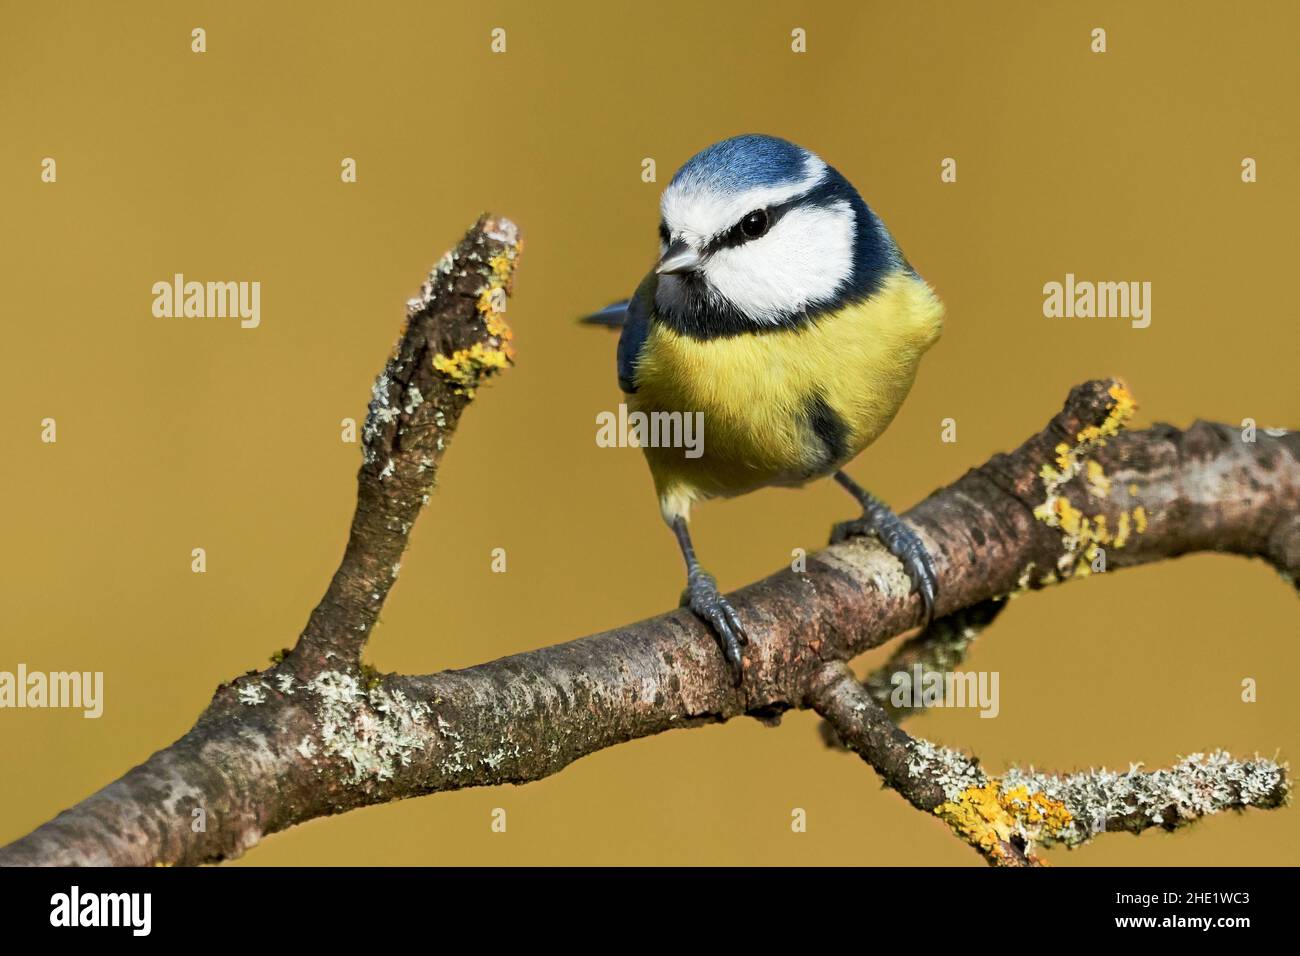 Blue Tit close-up (Cyanistes Caeruleus). Songbird with yellow and blue feathers sitting on branch with natural background. Stock Photo